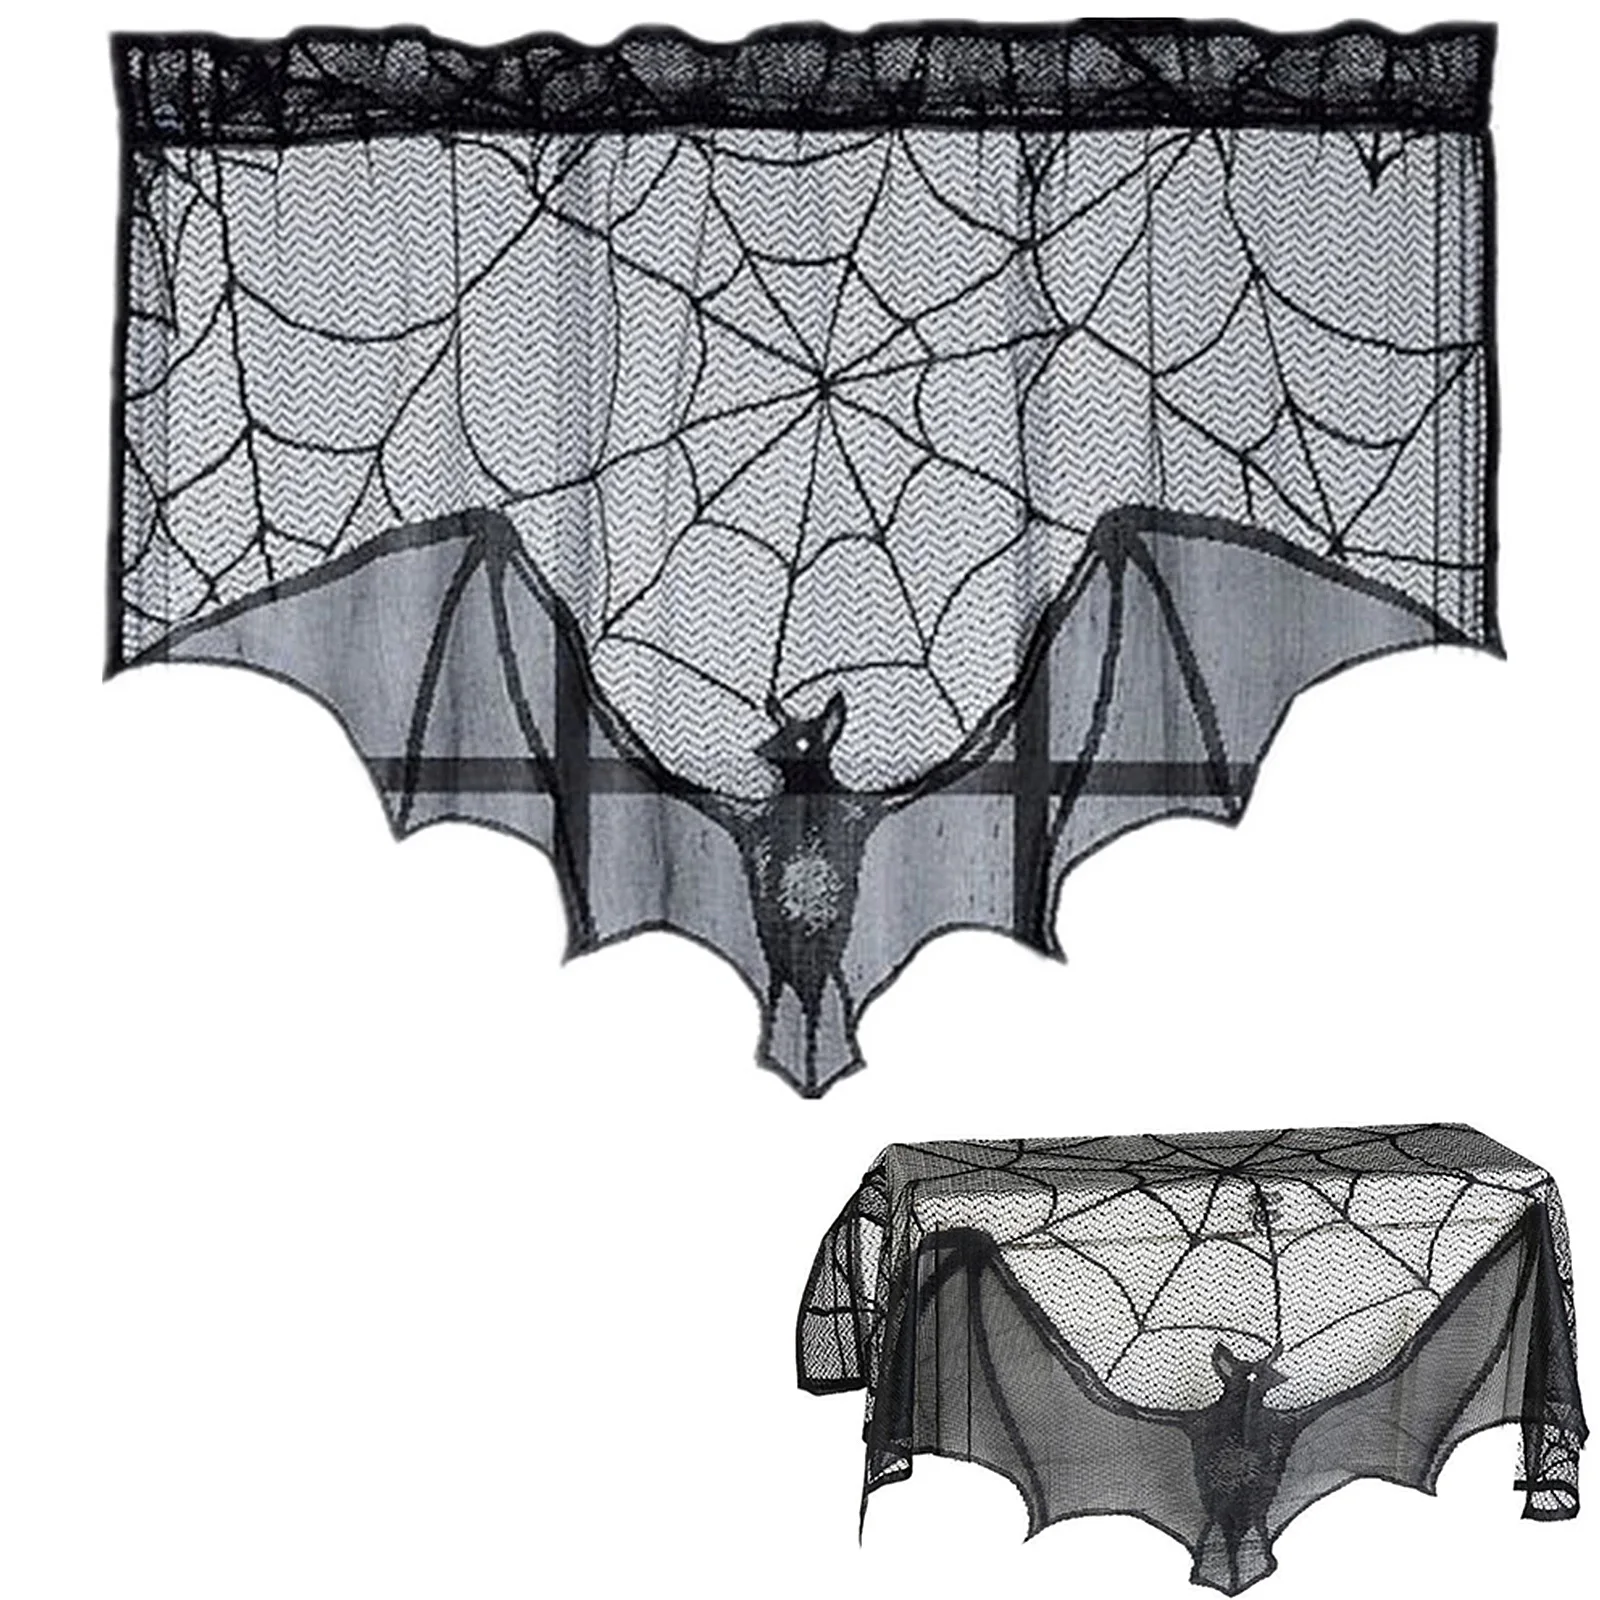 

Halloween Decorative Bats Curtains Black Lace Spider Web Holiday Stove Towel Lampshade Fireplace Cloth Decor for Spooky Festival